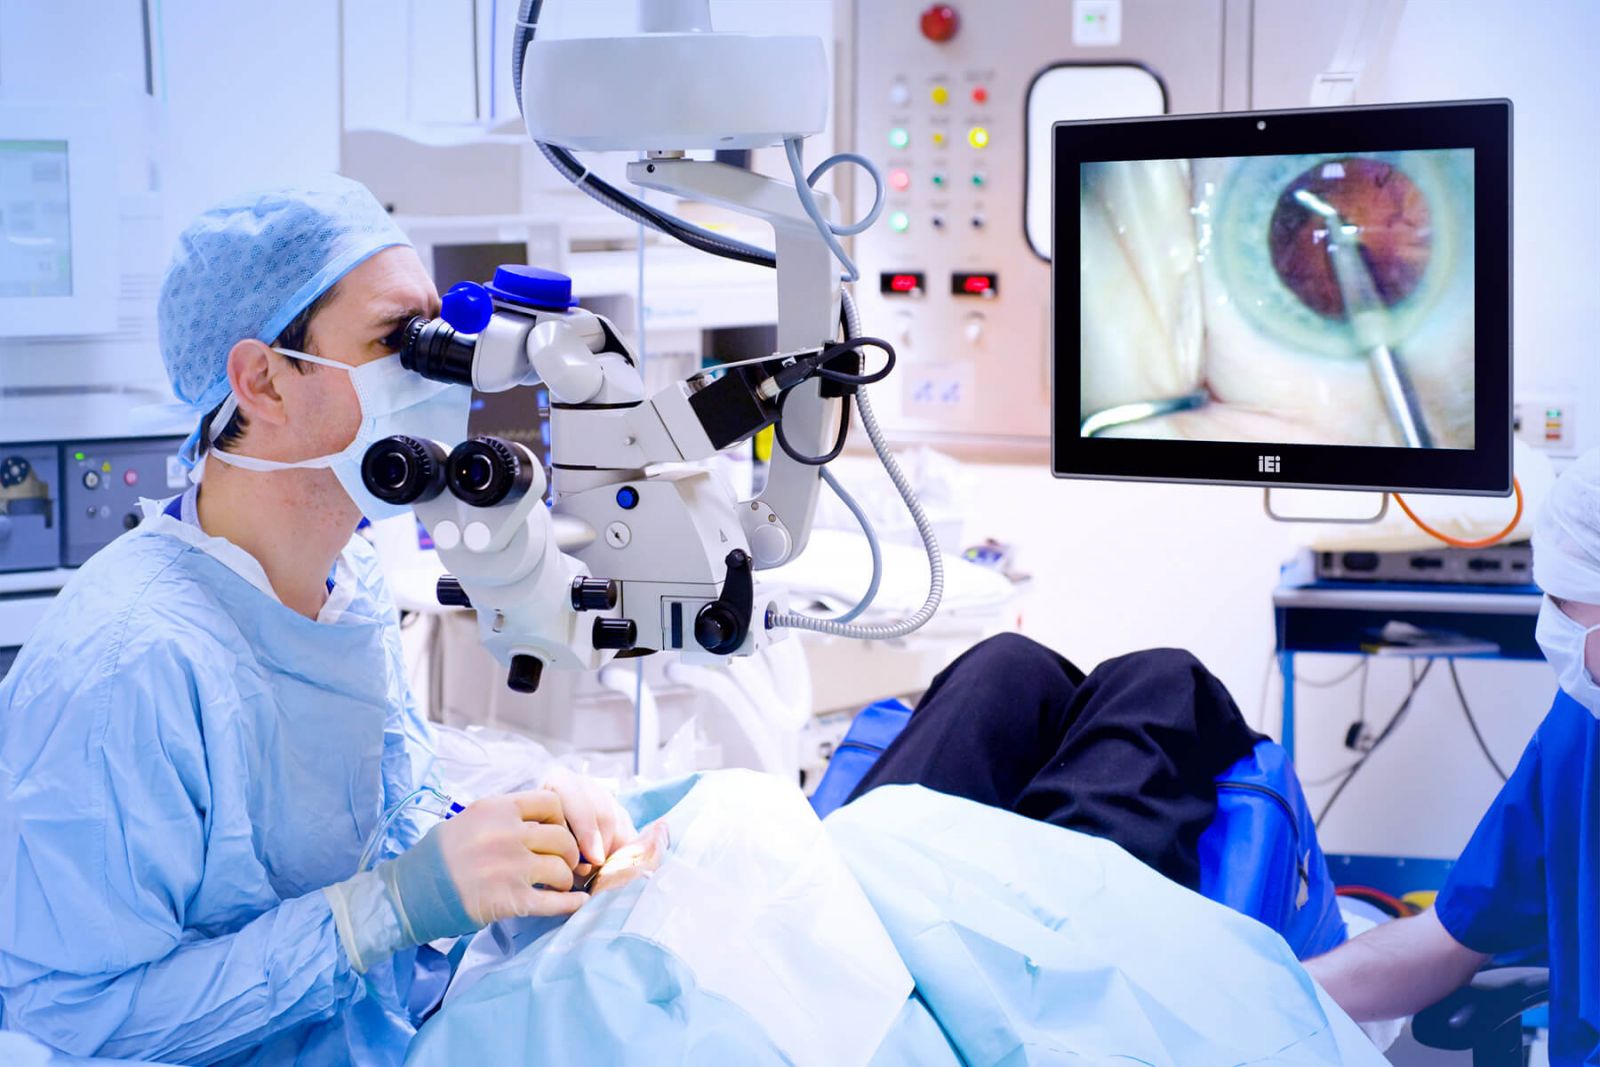 Glaucoma and Cataract Surgery Devices Market